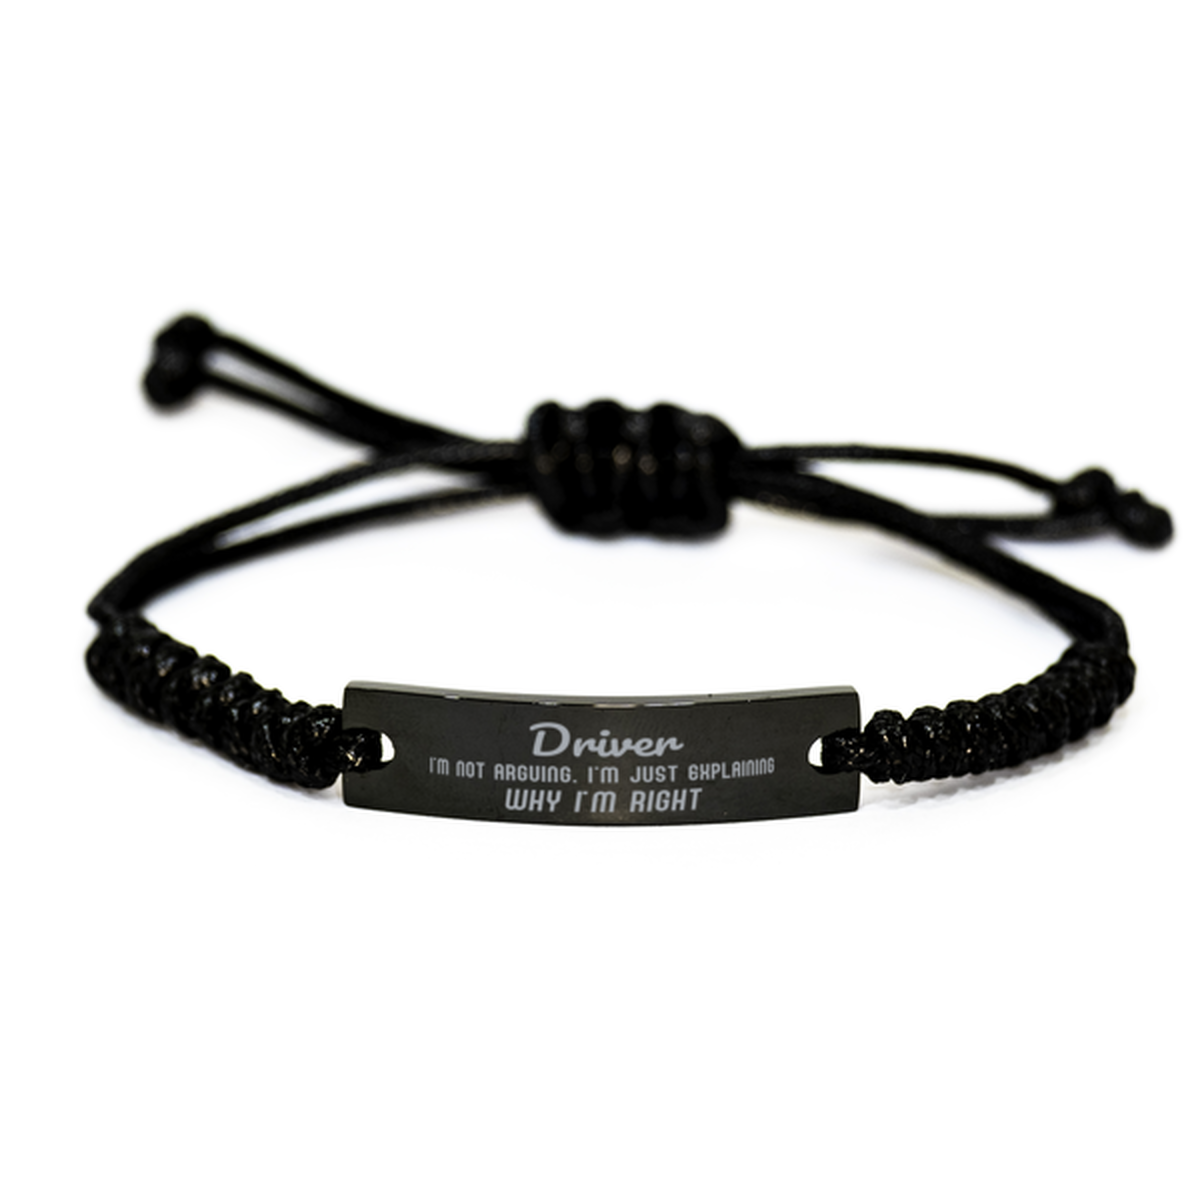 Driver I'm not Arguing. I'm Just Explaining Why I'm RIGHT Black Rope Bracelet, Funny Saying Quote Driver Gifts For Driver Graduation Birthday Christmas Gifts for Men Women Coworker